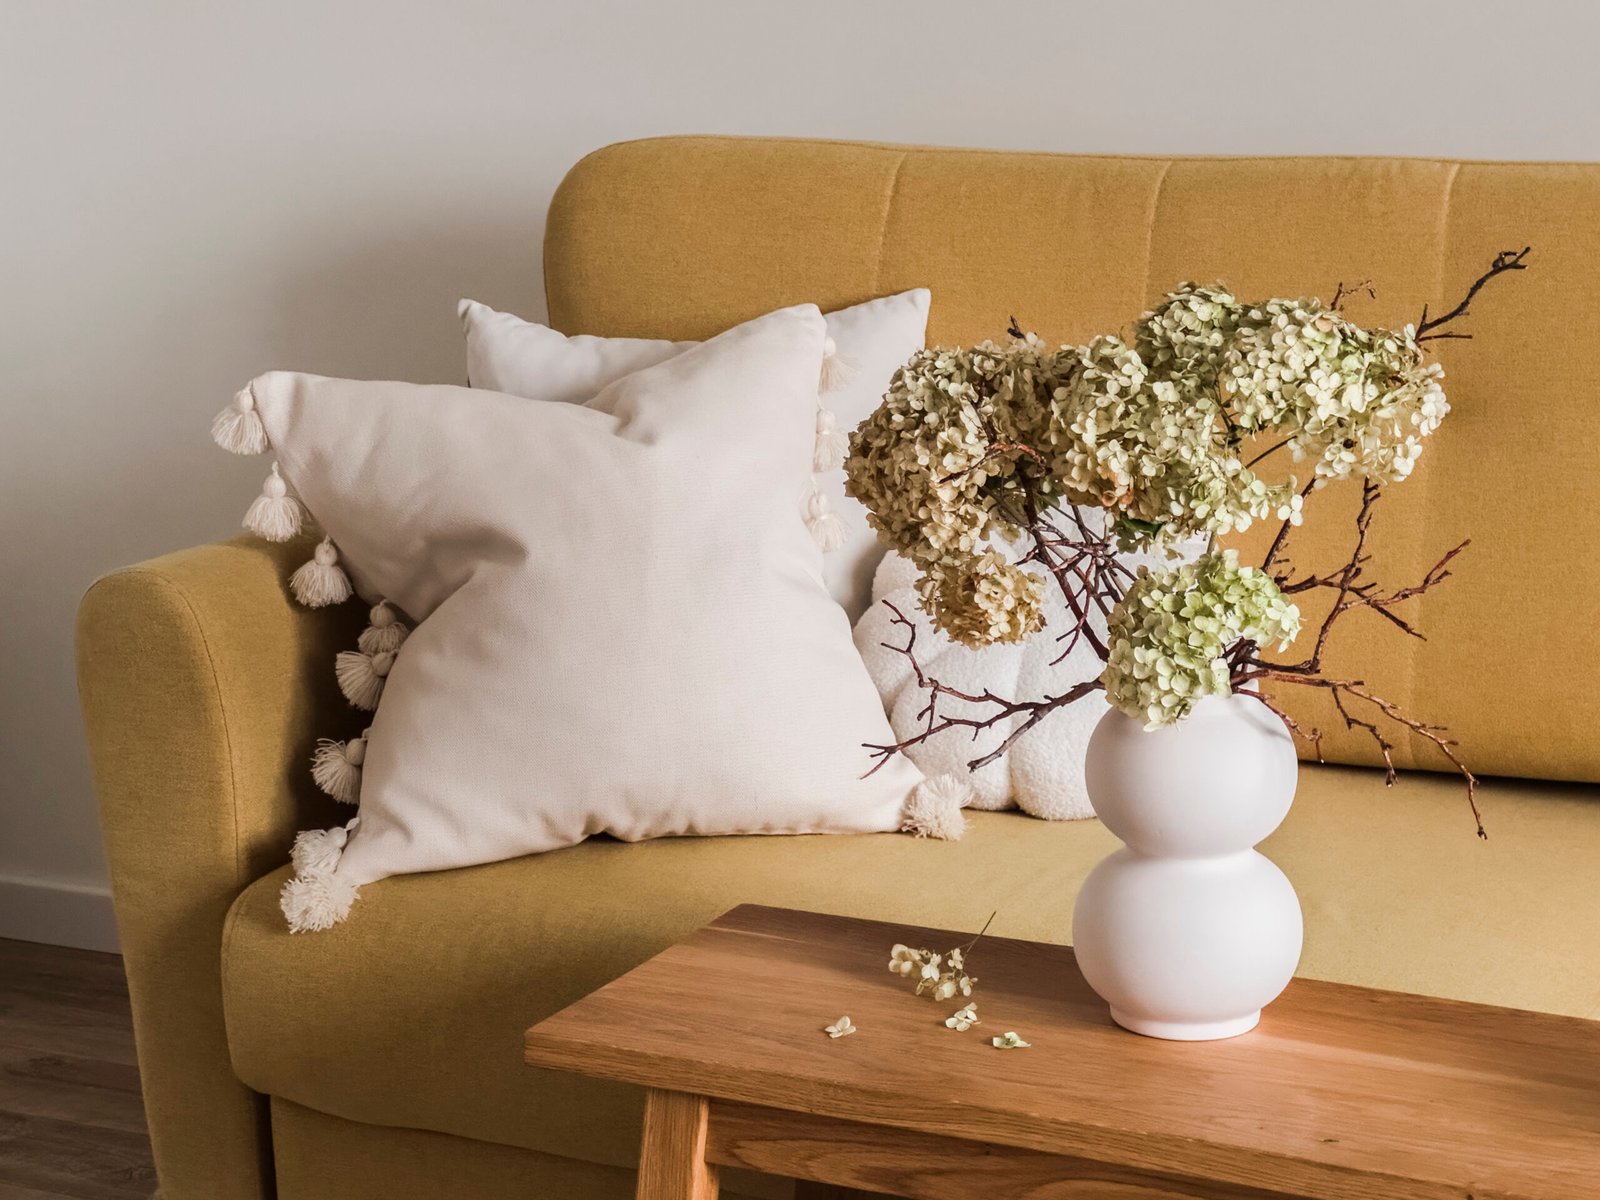 A yellow sofa with decorative pillows, a wooden bench with a vase of dried hydrangeas in the living room.